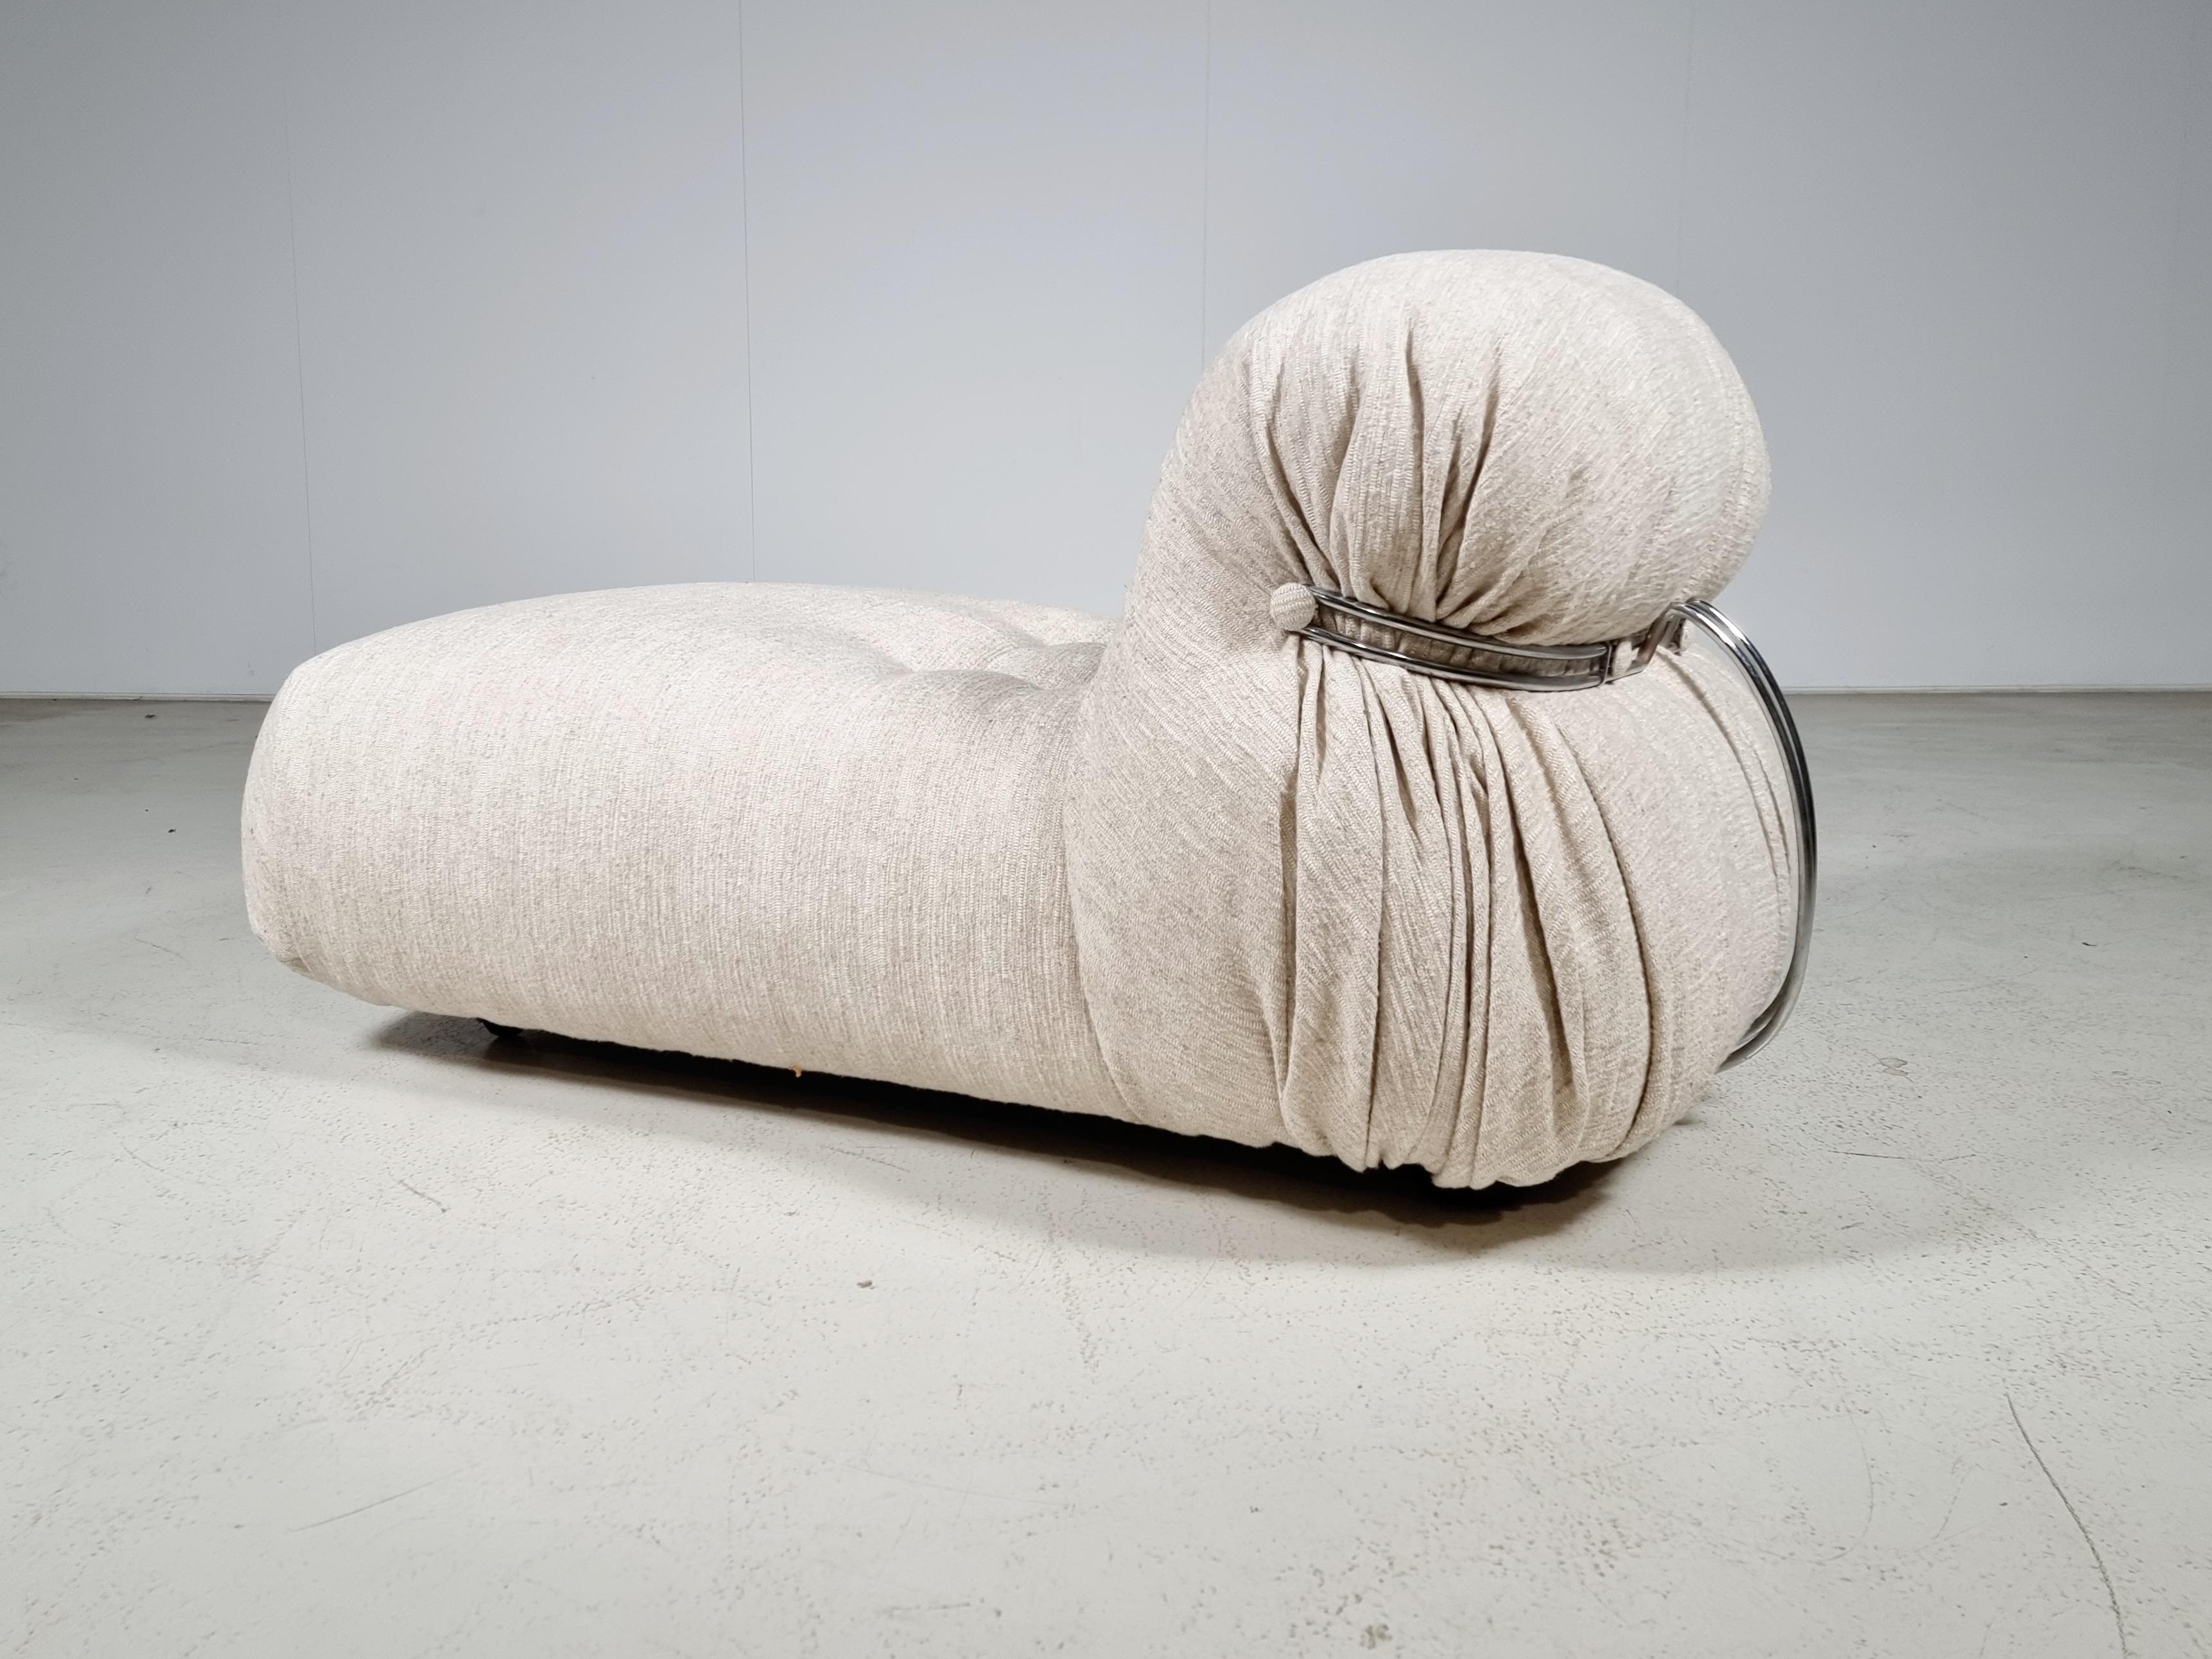 Rare Soriana chaise longue/lounger by Afra & Tobia Scarpa for Cassina, Italy, 1970, It's reupholstered in a beautiful textured fabric by Bruder. The foam is also in very good condition and shows its characteristic round and bulky shape. The concept